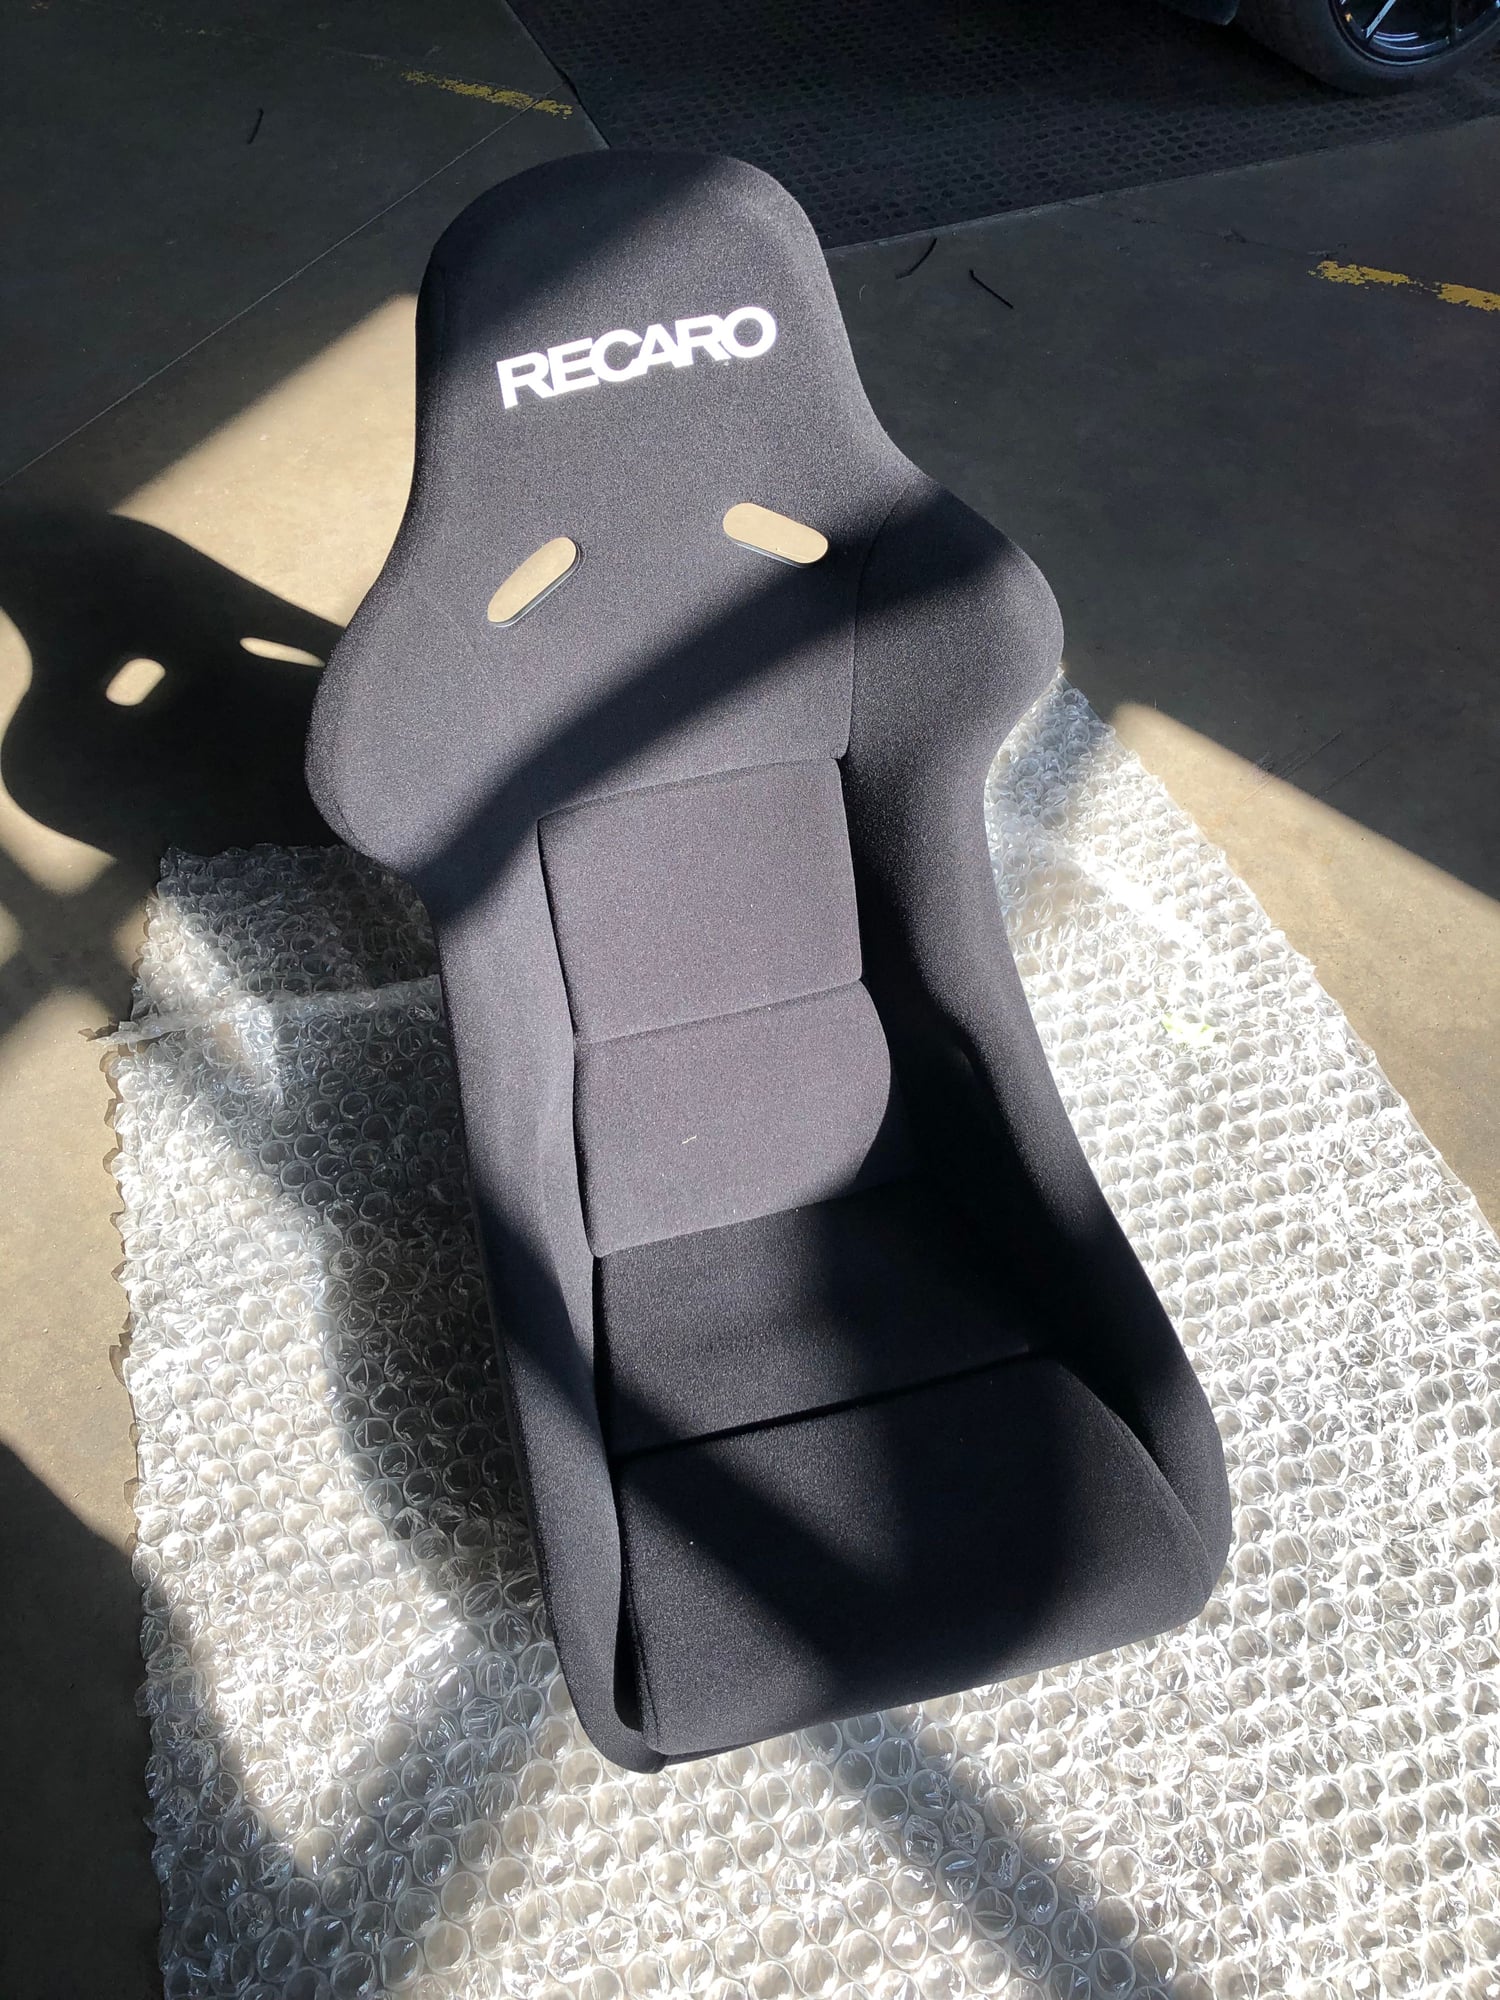 Interior/Upholstery - BN Recaro Pole Position NG seats for sale with painted grey/black backs color 7A1 - New - 2006 to 2011 Porsche 911 - Toronto, ON L6A 0P, Canada